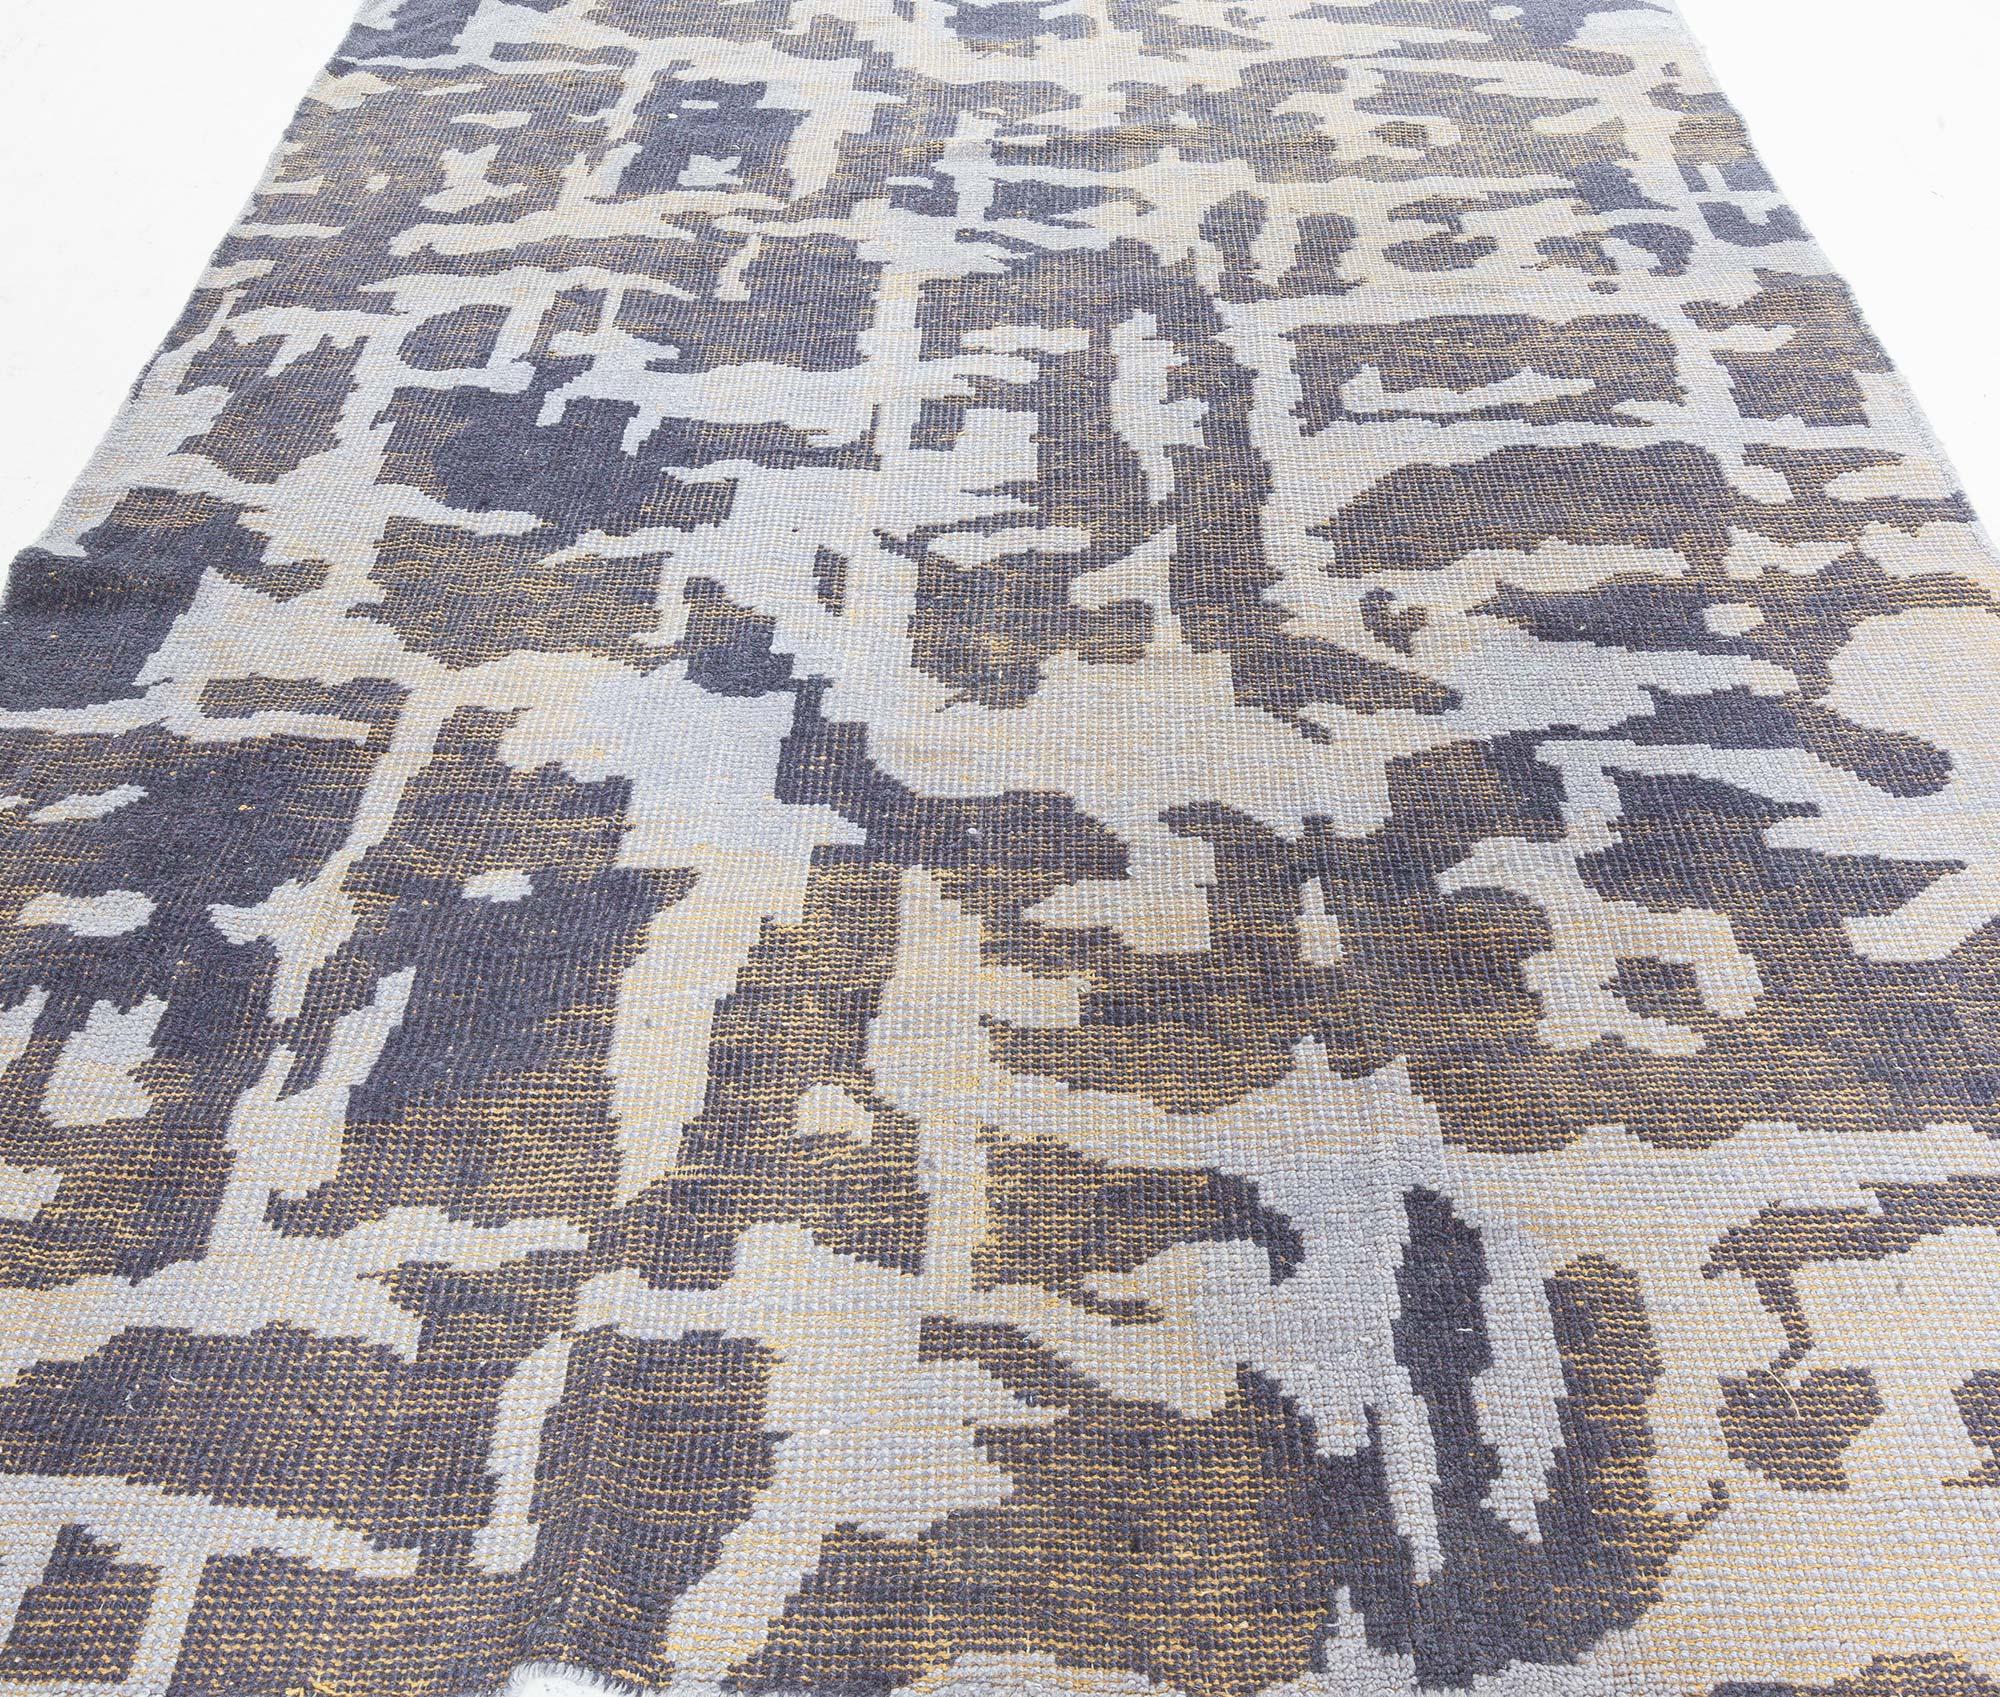 Contemporary Abstract Blue Purple Flat Weave Rug
Size: 5'7